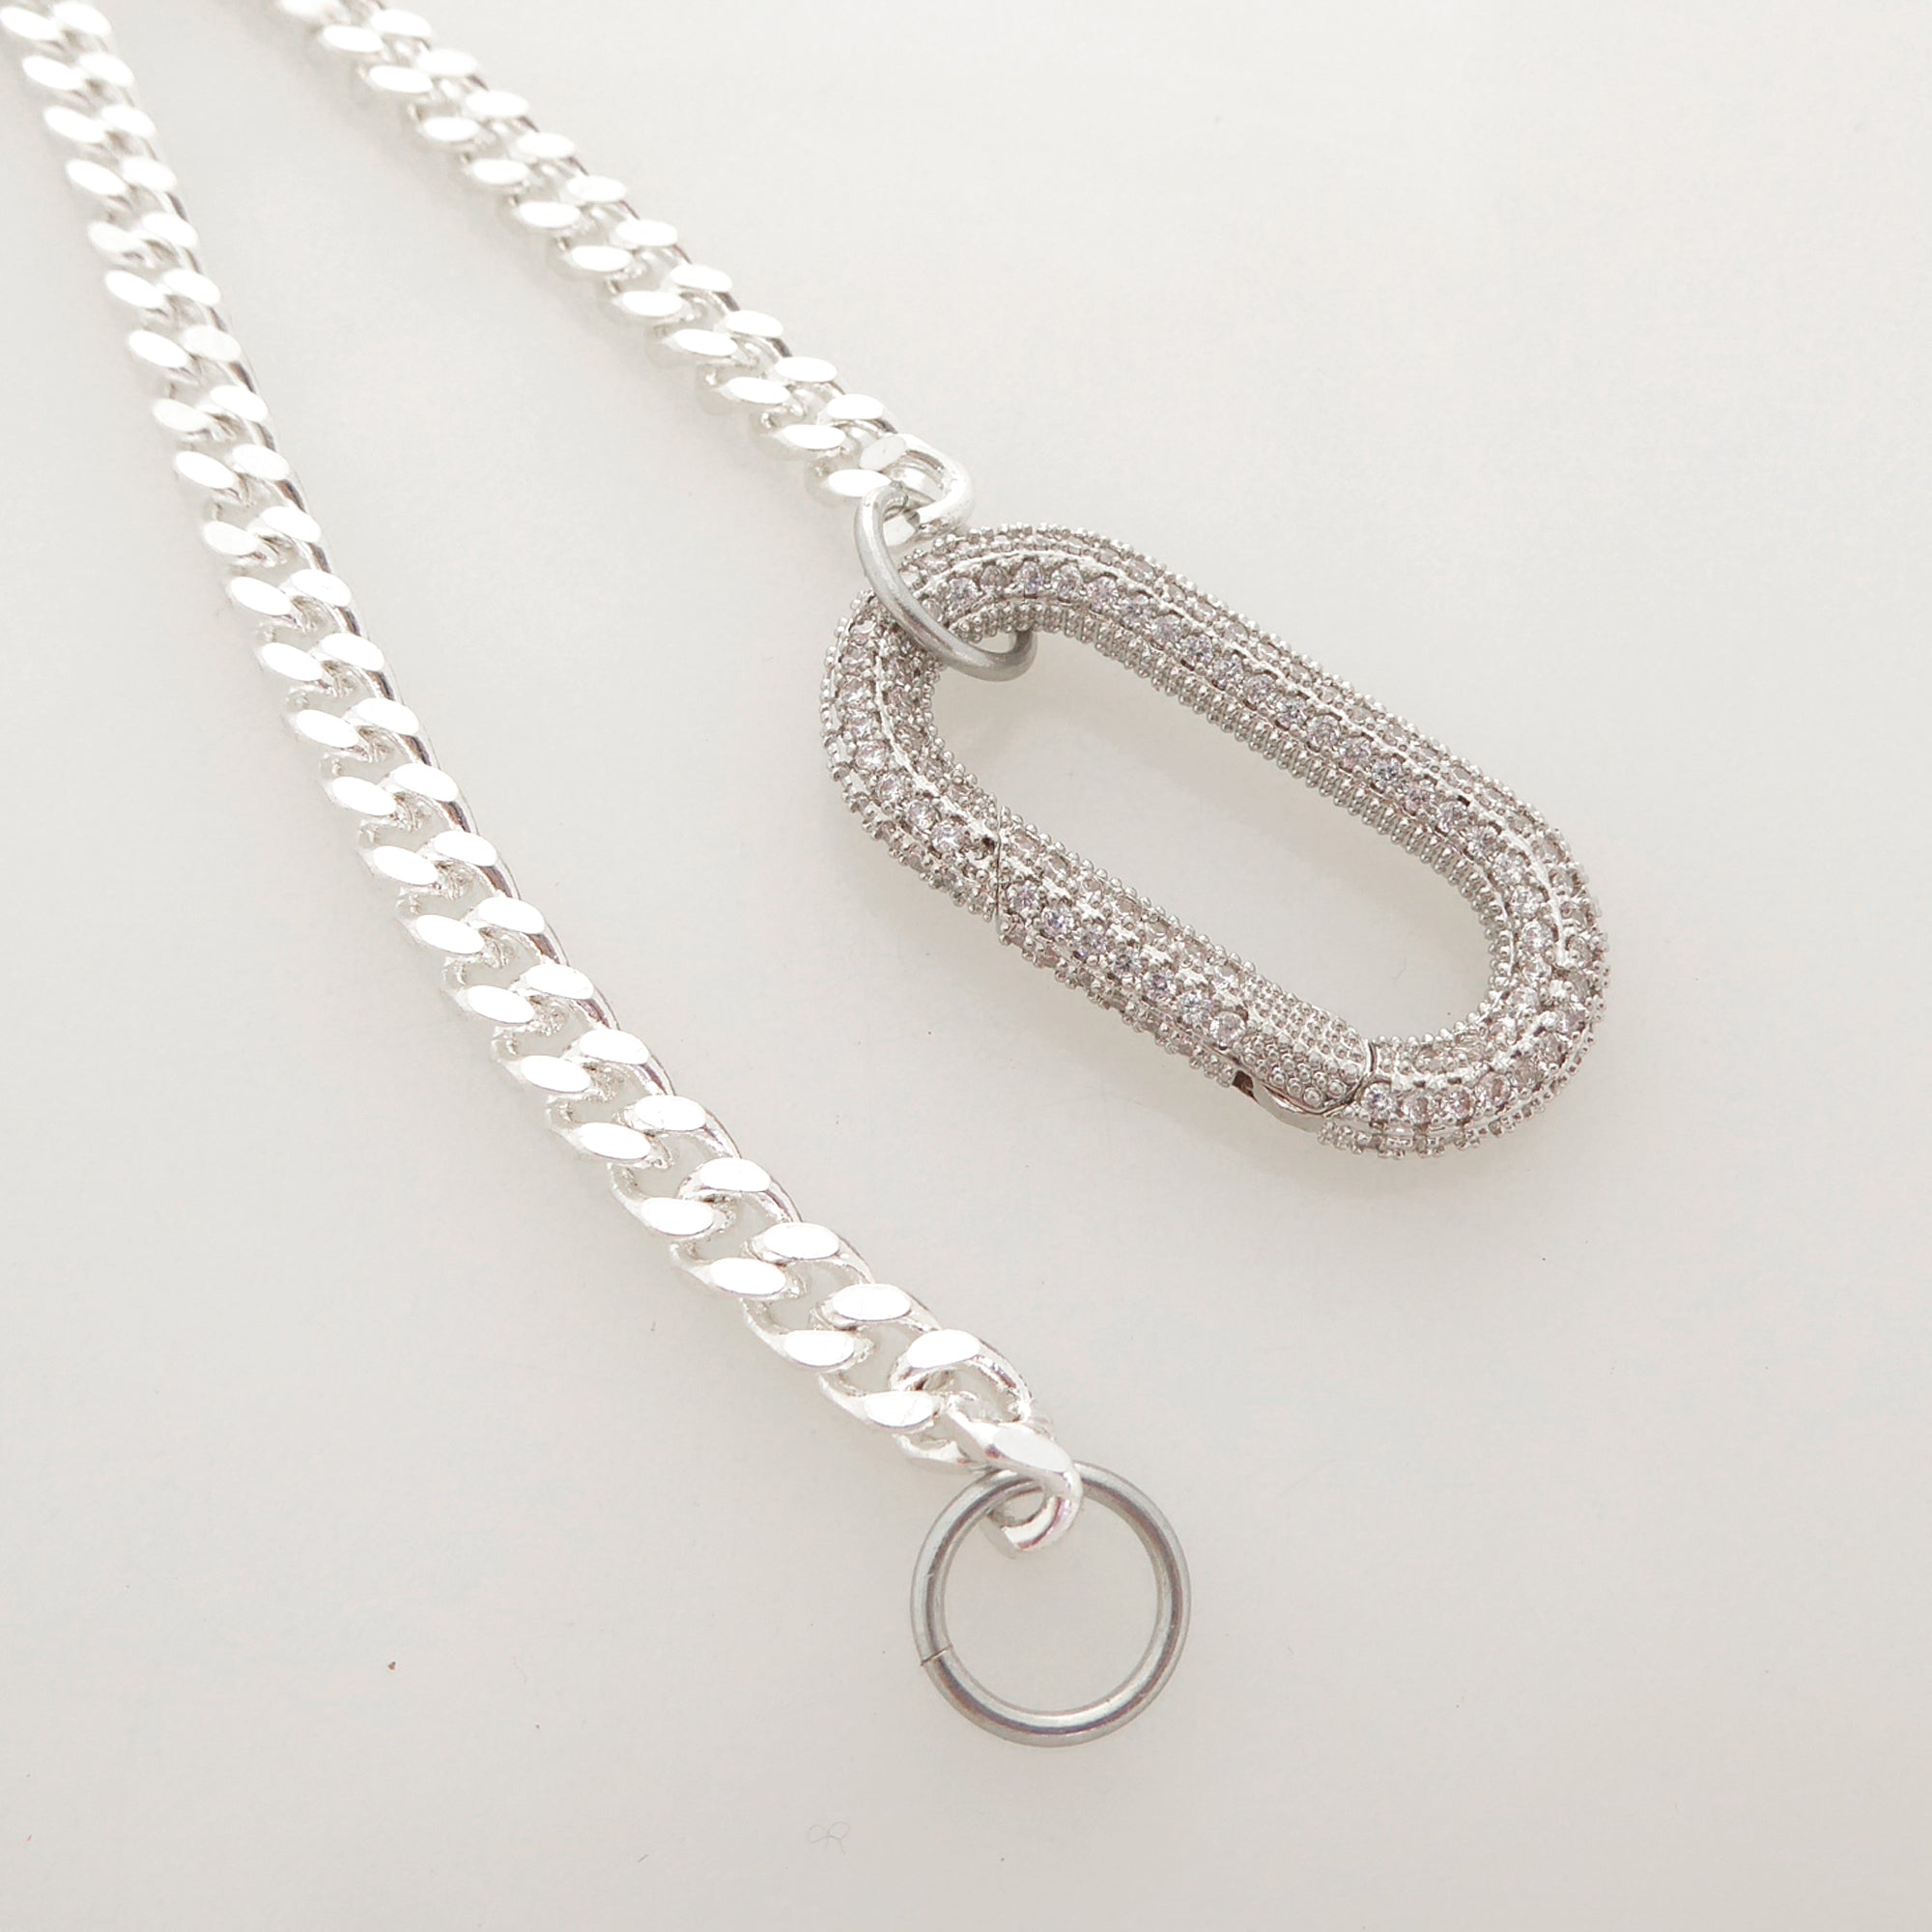 Silver Carabiner Choker Chain-Matte Paperclip Chain Necklace 19